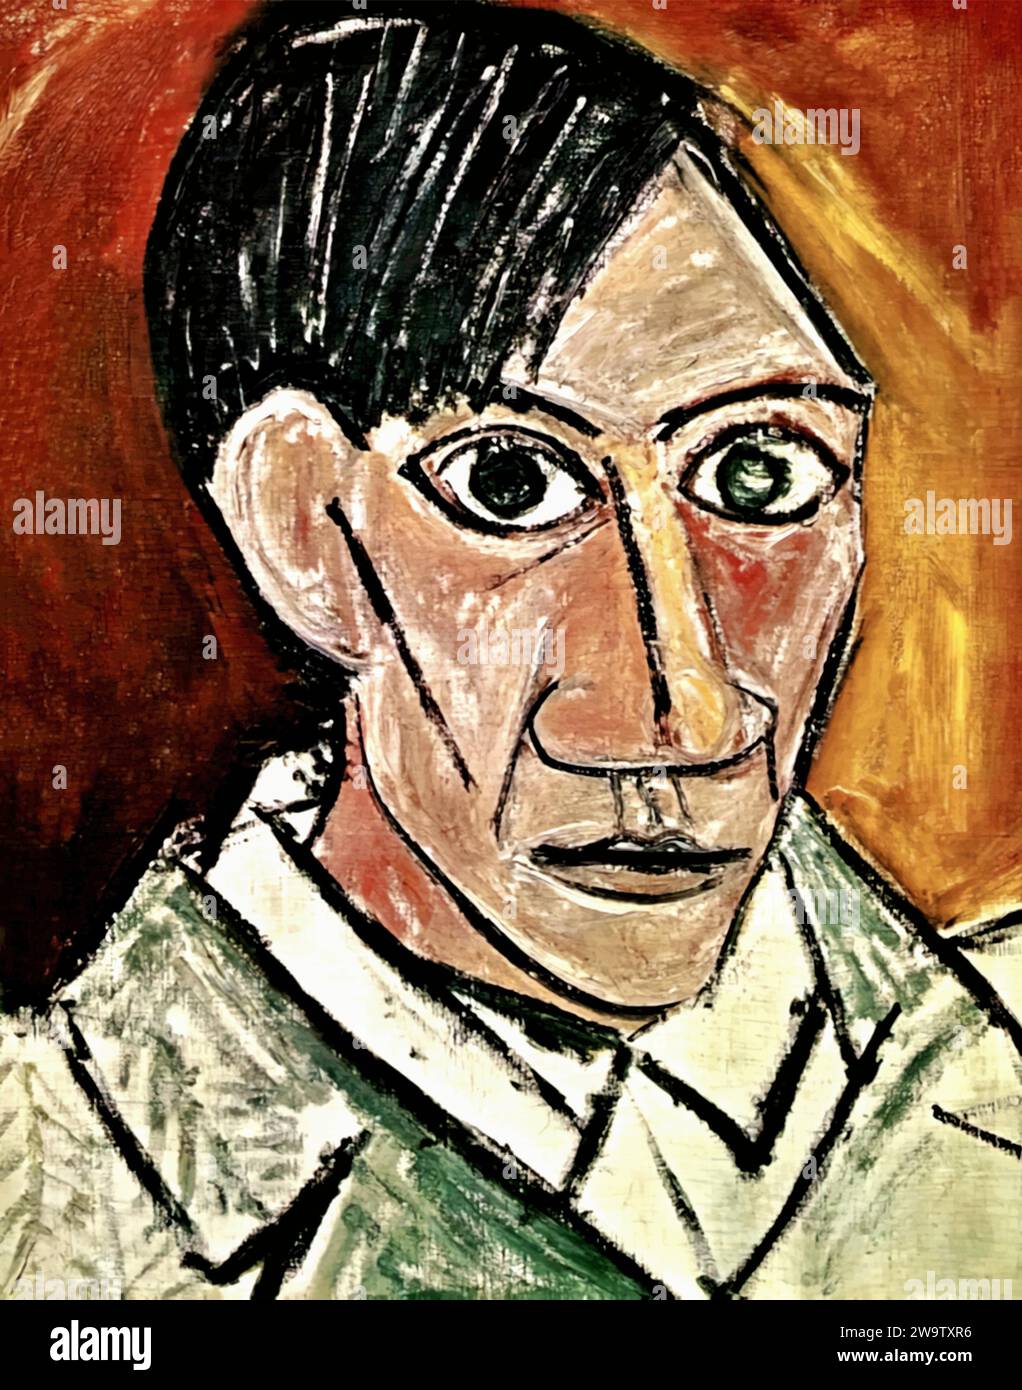 Self Portrait, Pablo Picasso 1907 (Painting) by Artist Picasso, Pablo (1881-1973) Spanish. Stock Vector